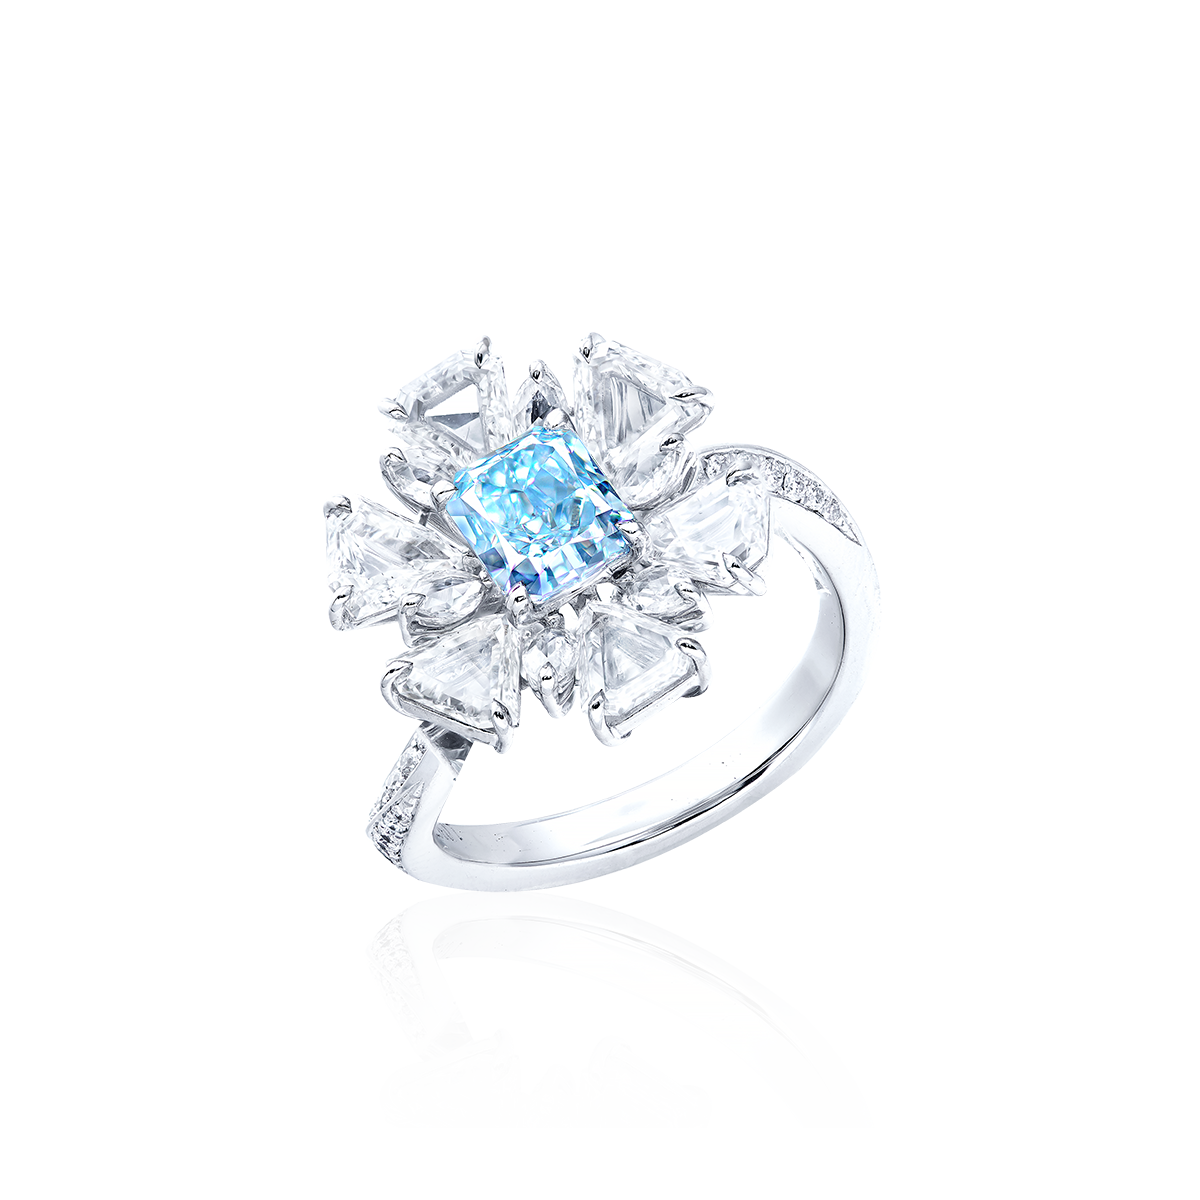 GIA 1.03克拉 藍鑽鑽戒
Exquisite Fancy Blue Colored 
Diamond and Diamond Ring